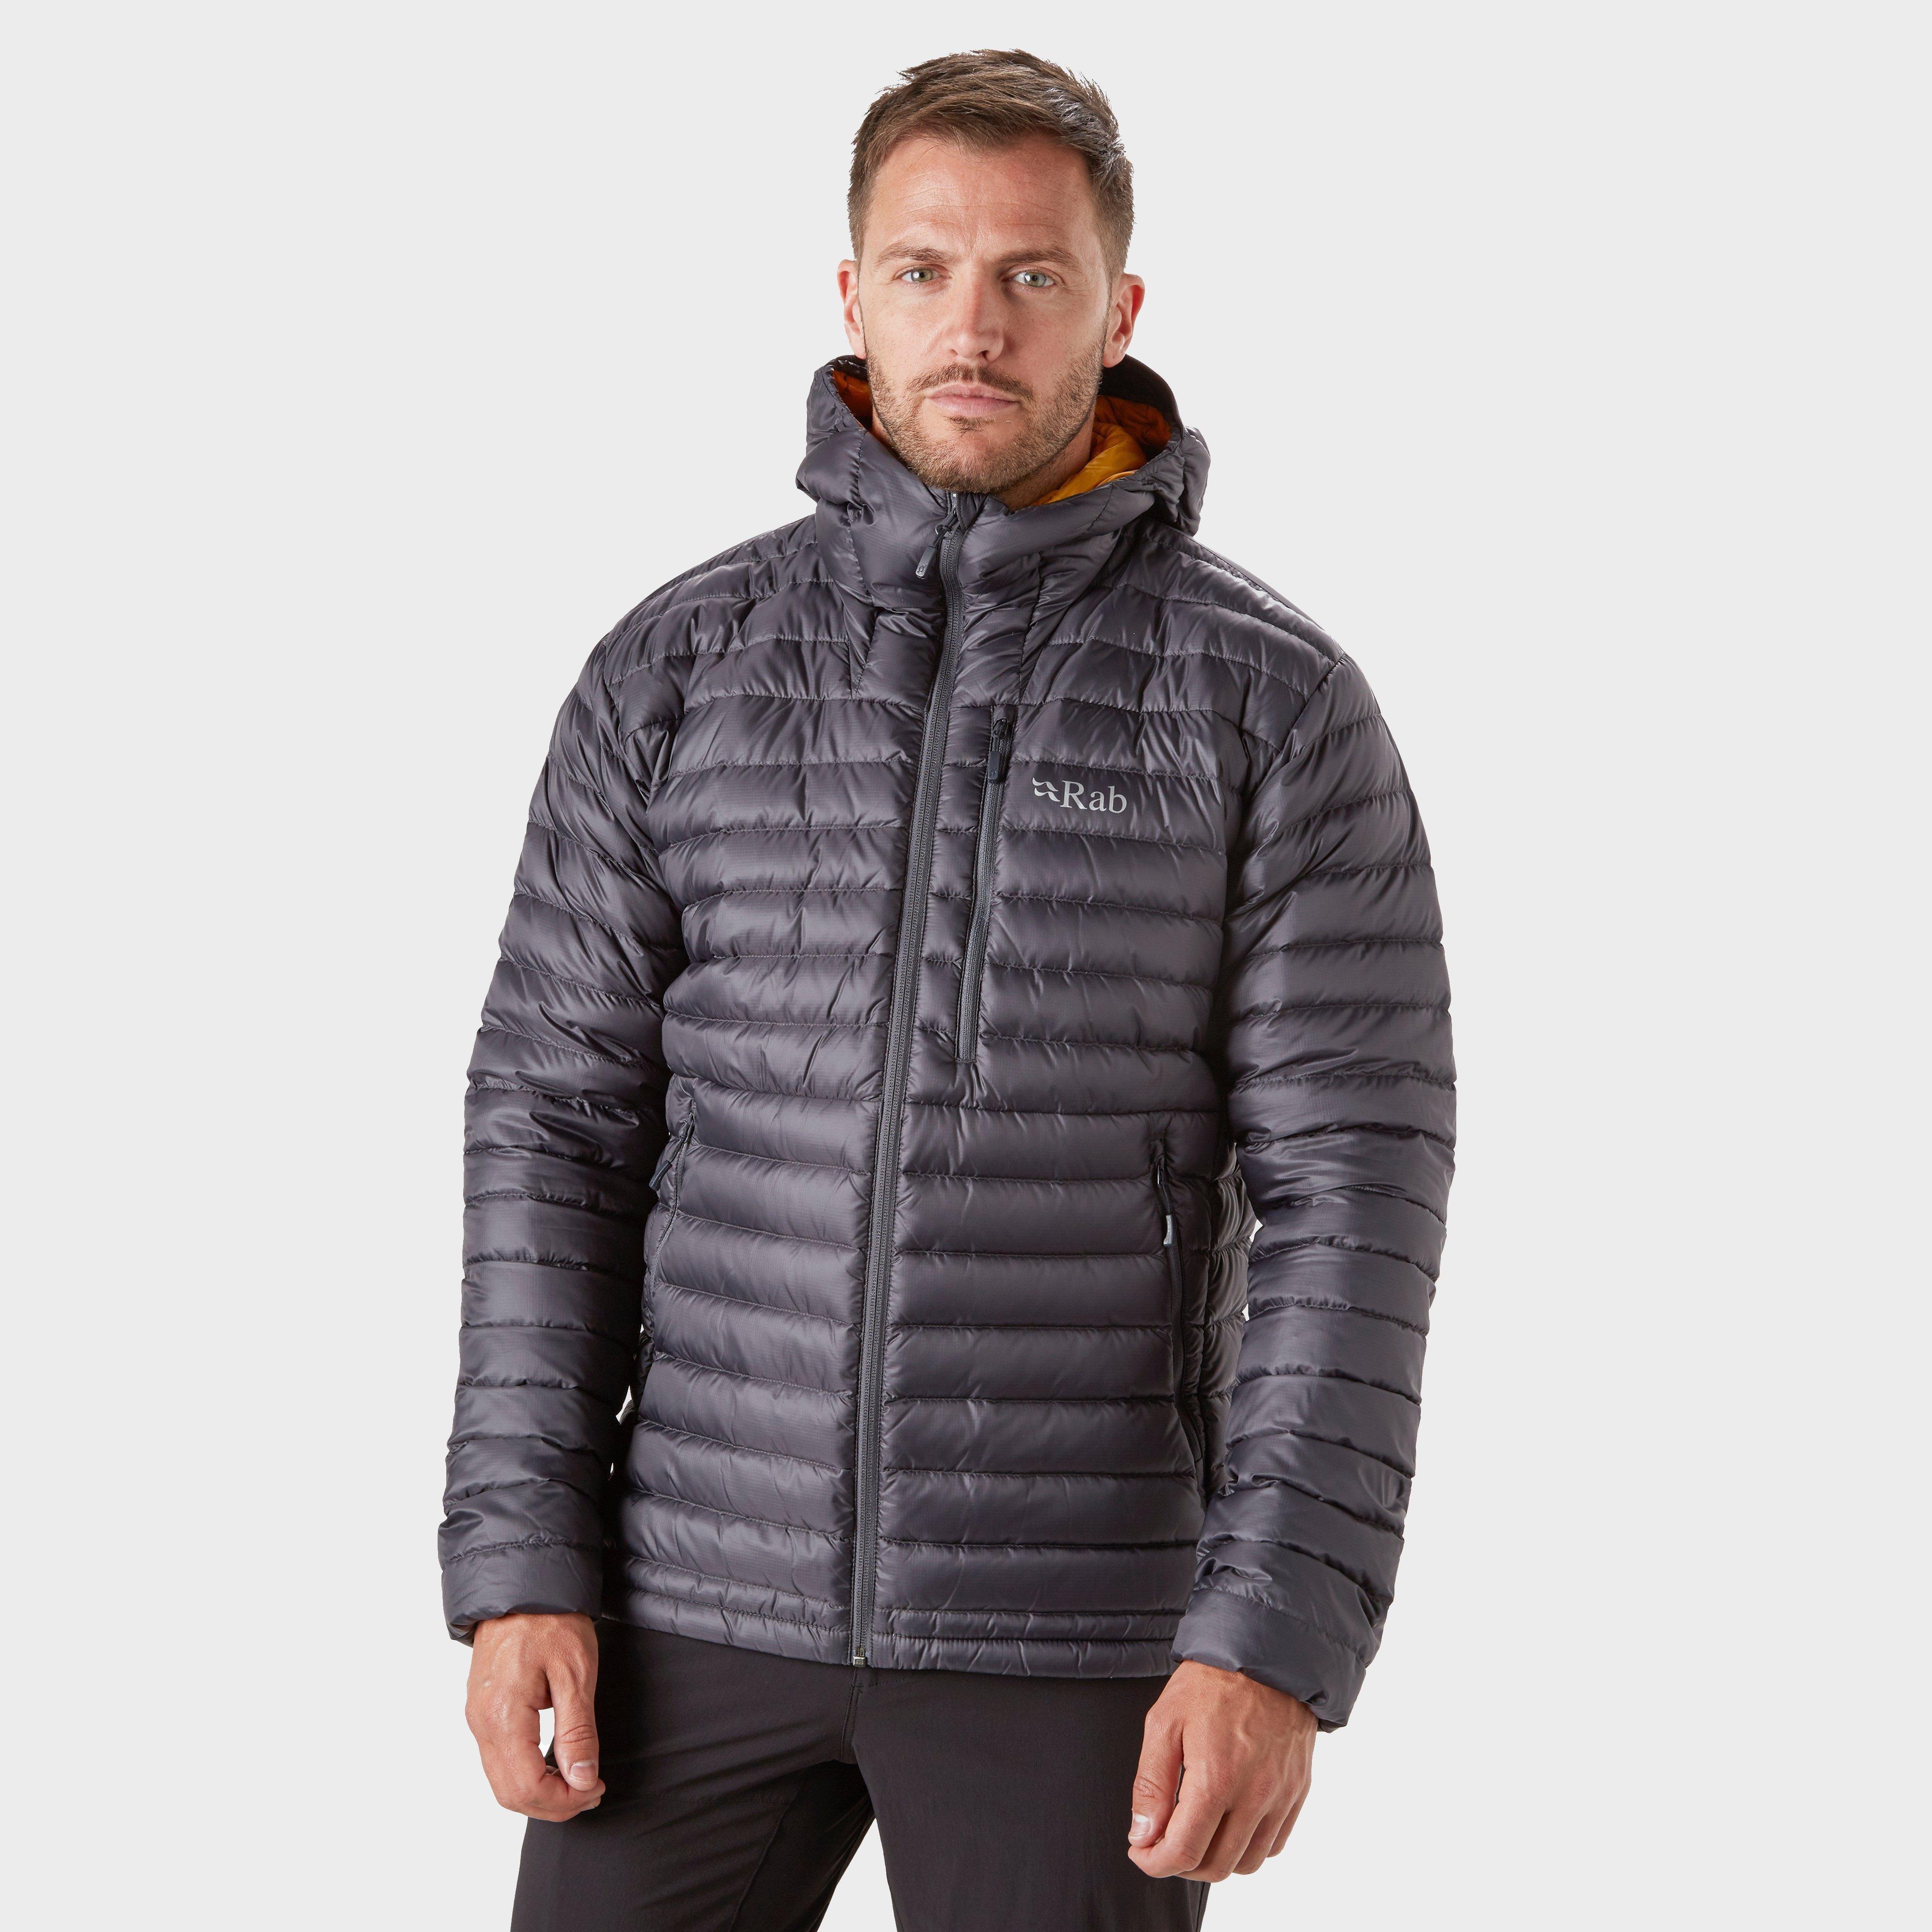 go outdoors north face jacket, OFF 71%,Buy!